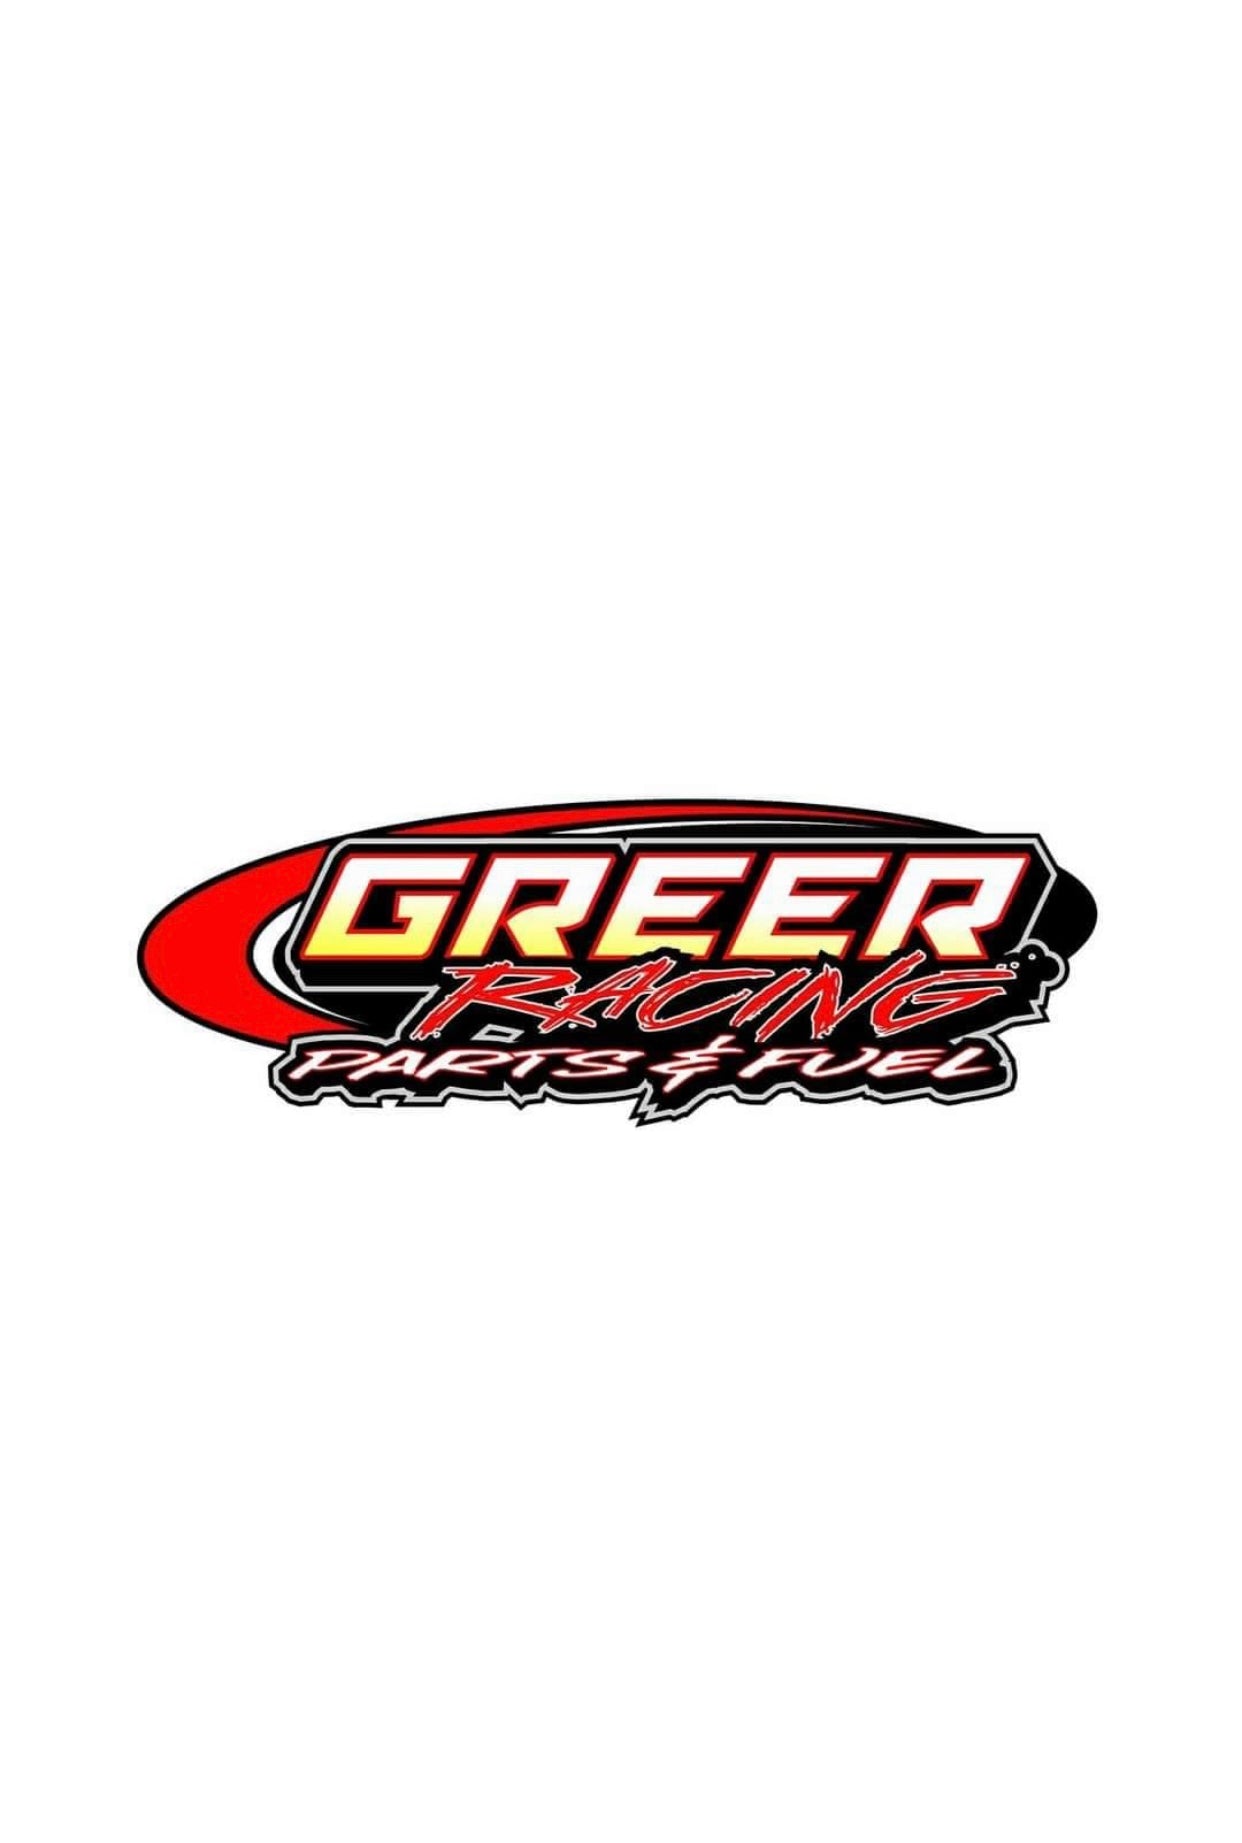 Load video: Greer Racing Parts and Fuel